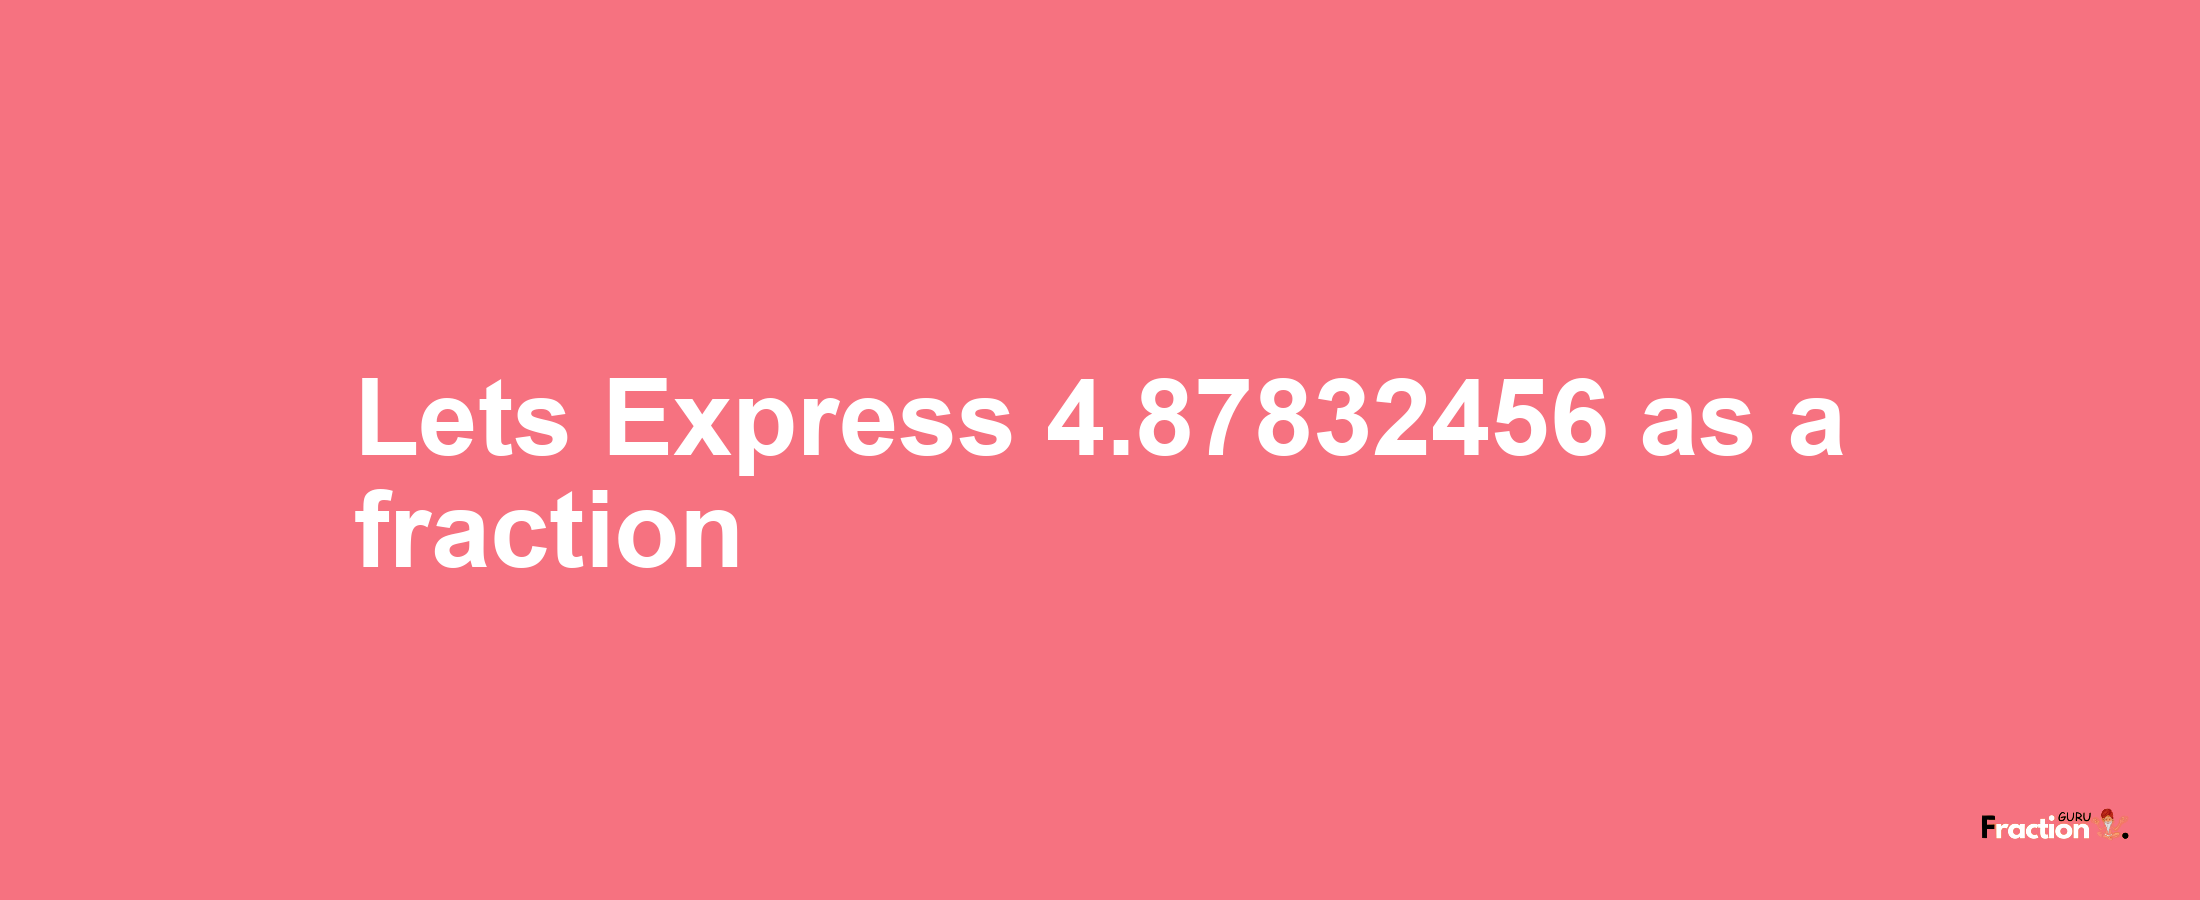 Lets Express 4.87832456 as afraction